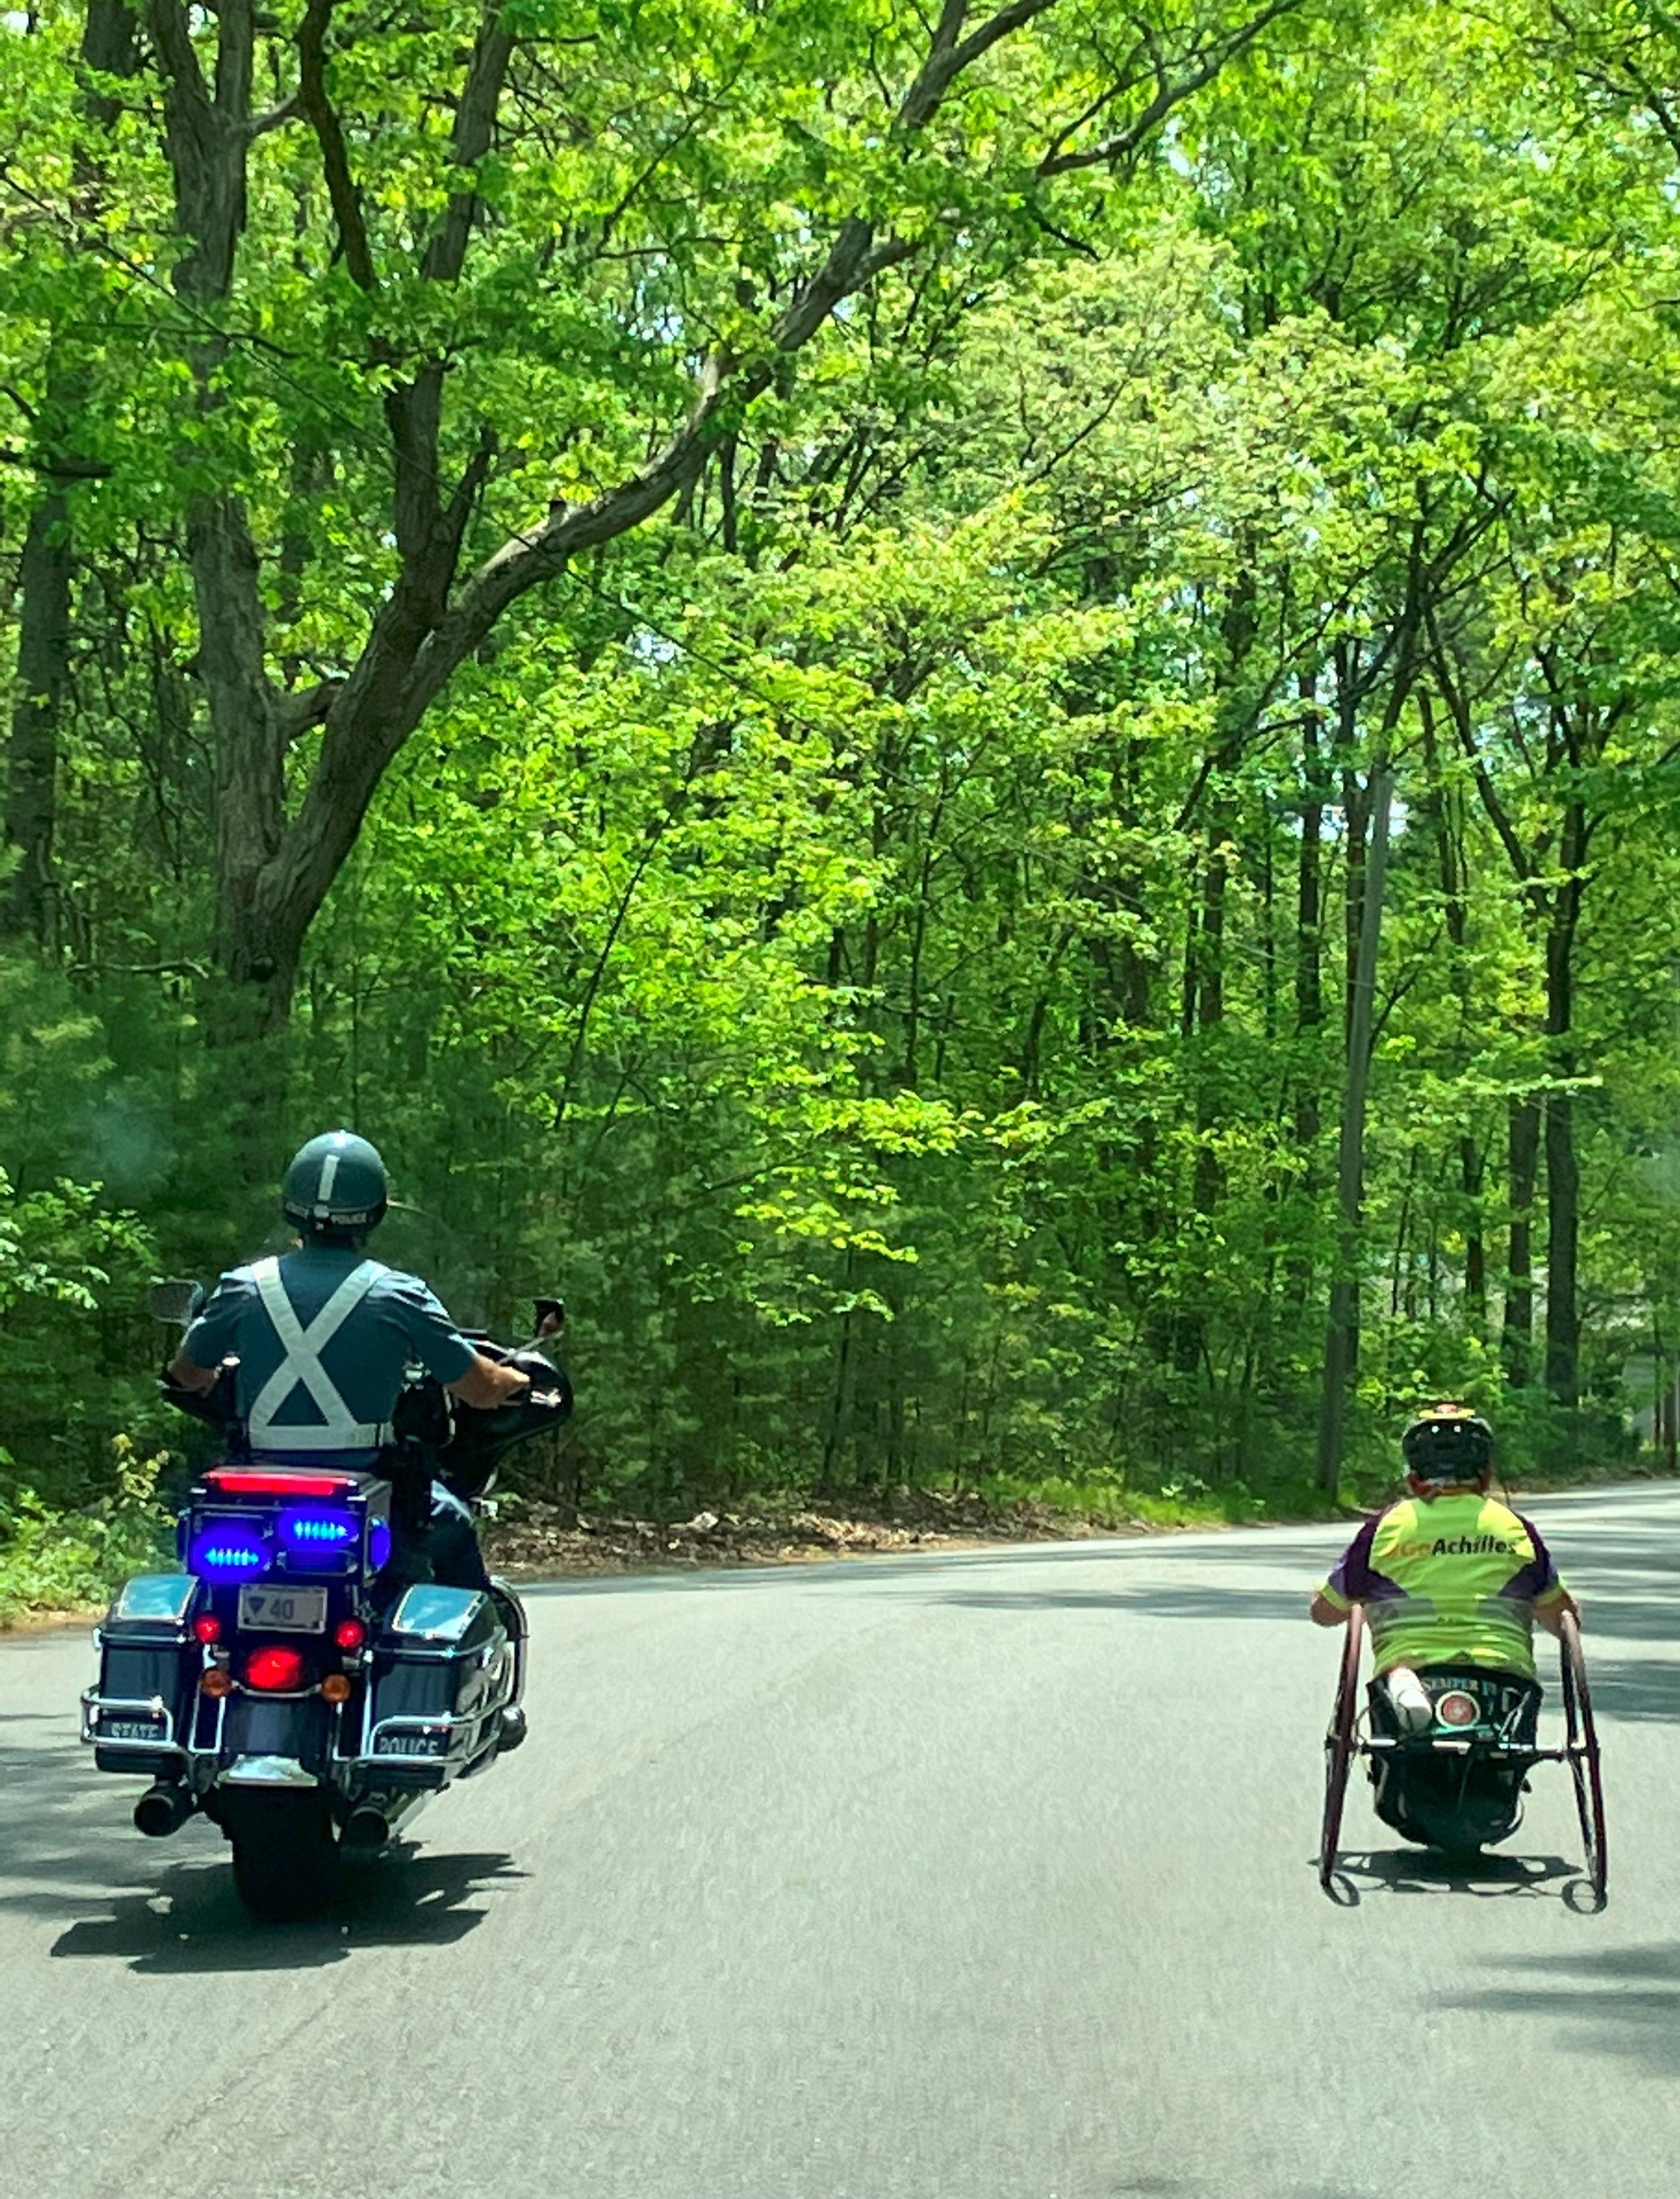  Achilles member handcycling down the street alongside a Massachusetts state police officer on a motorcycle 